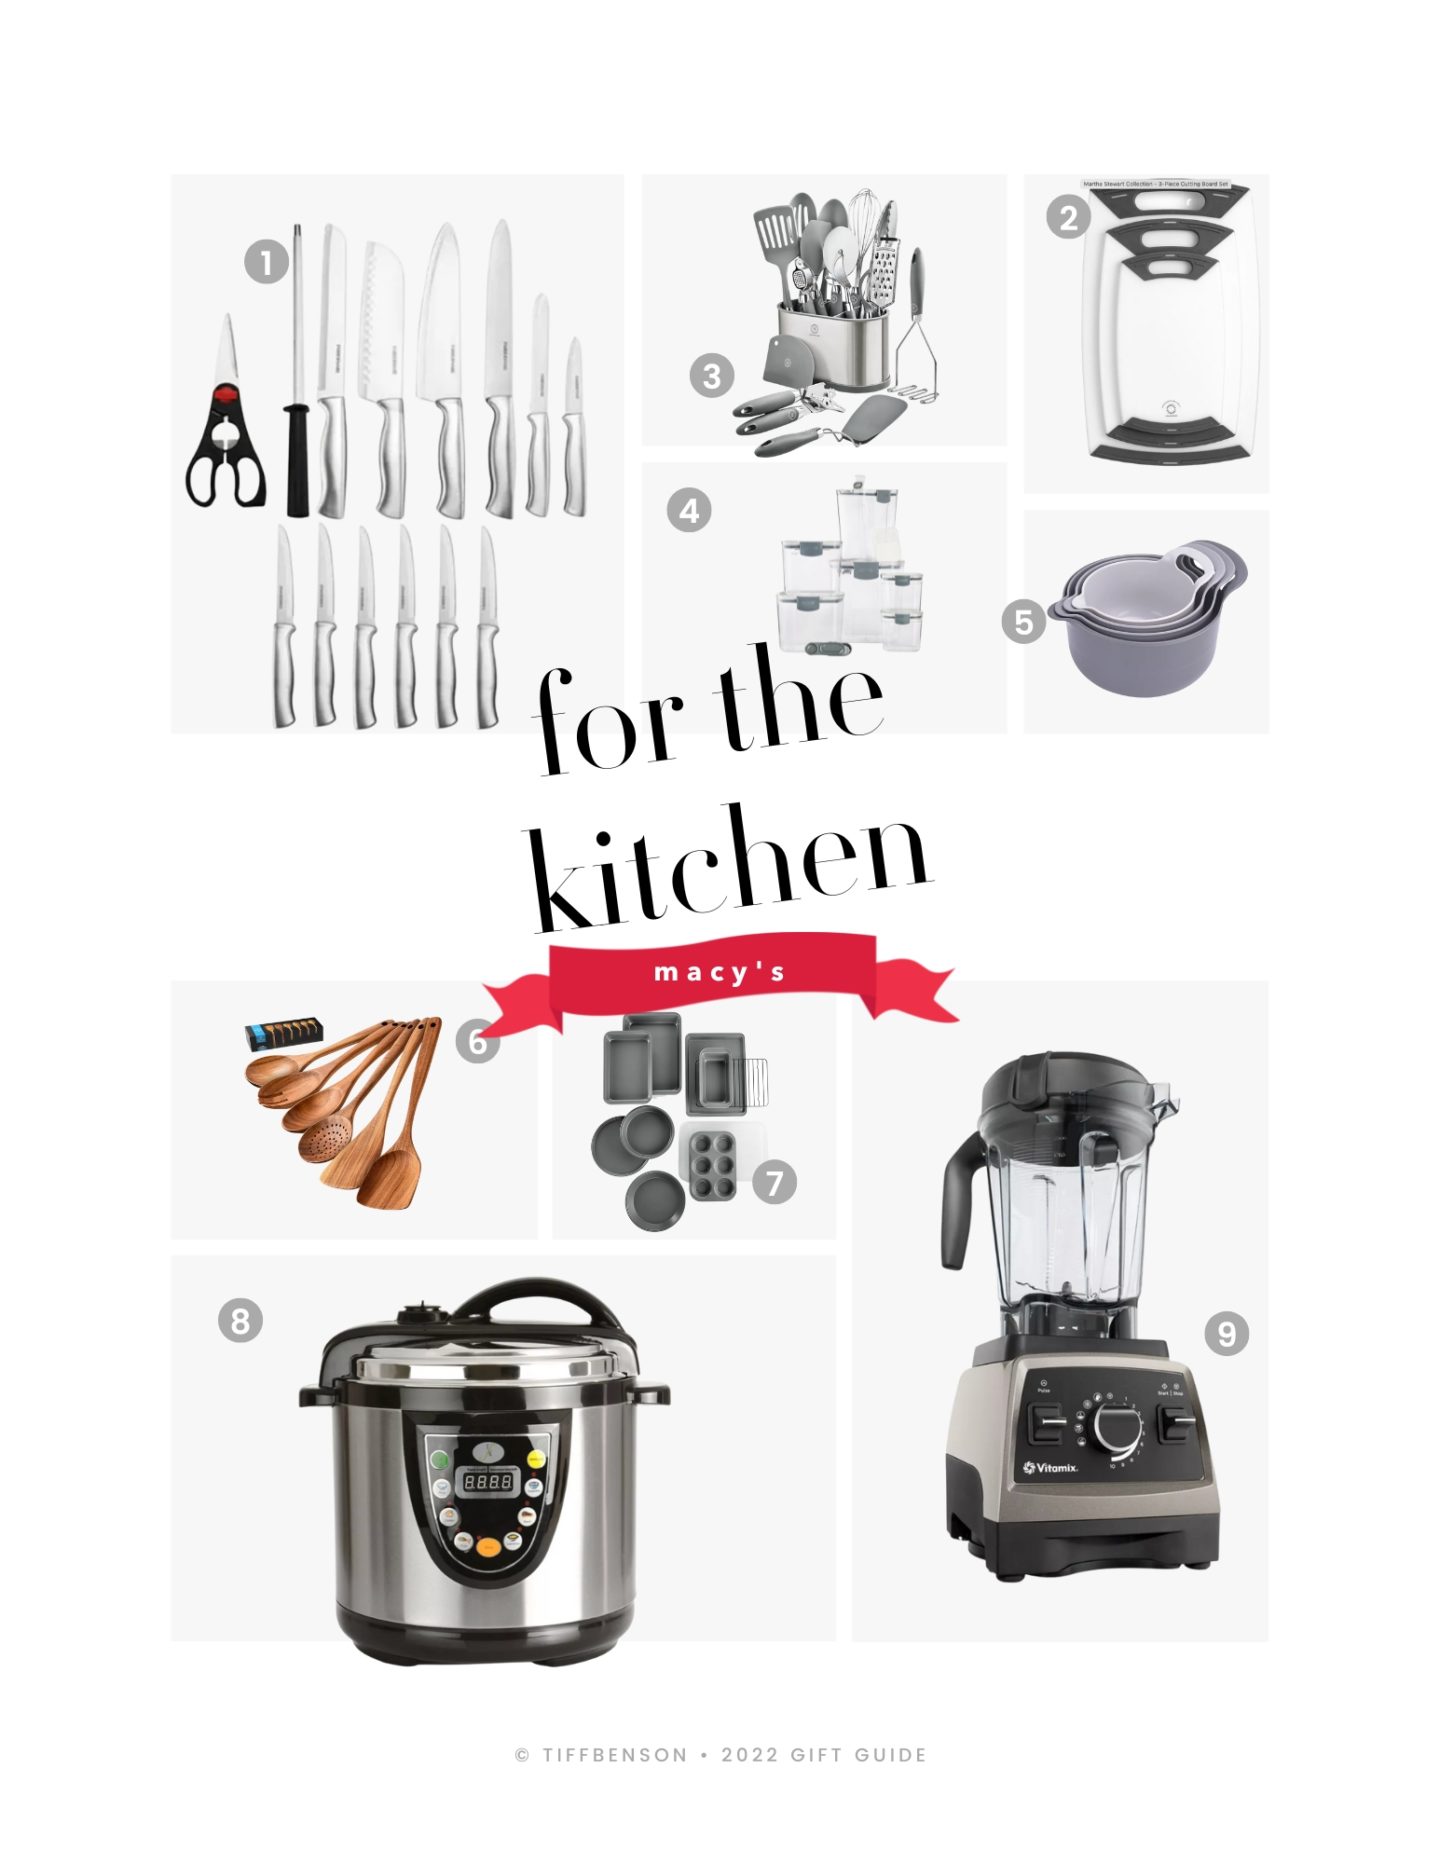 Macy's kitchen supplies, kitchen gifts for 2022